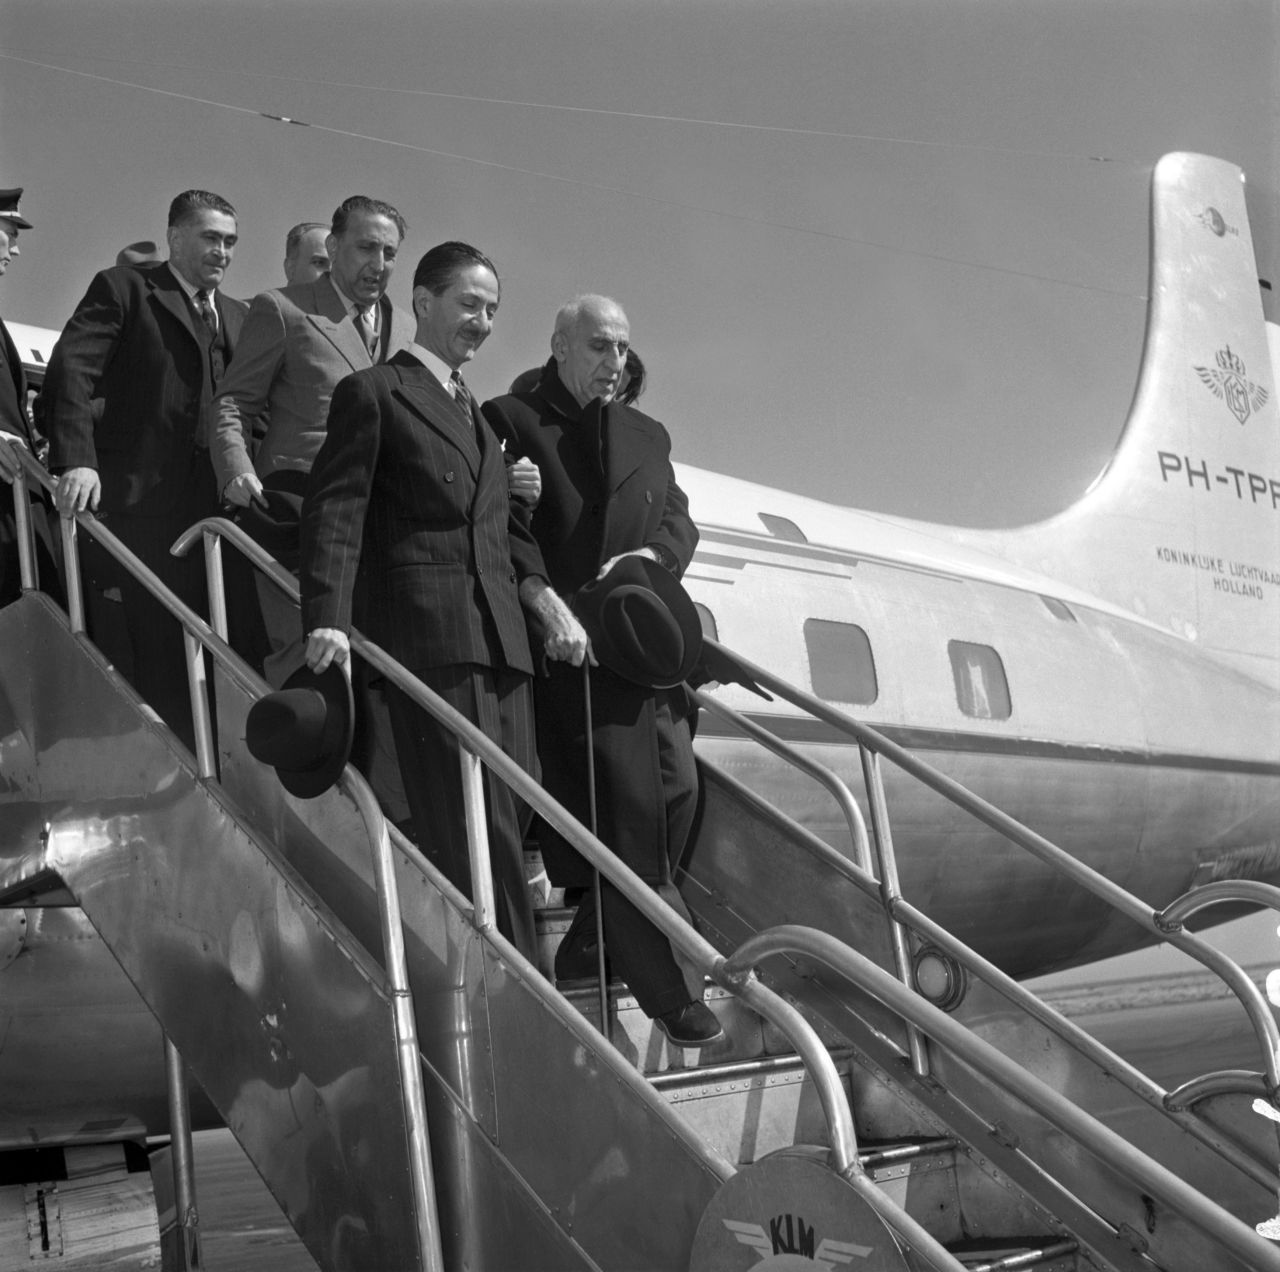 Former Iranian Prime Minister Mohammad Mossadegh steps off a plane in late August 1953. He was imprisoned for three years and put under house arrest until his death in 1967.